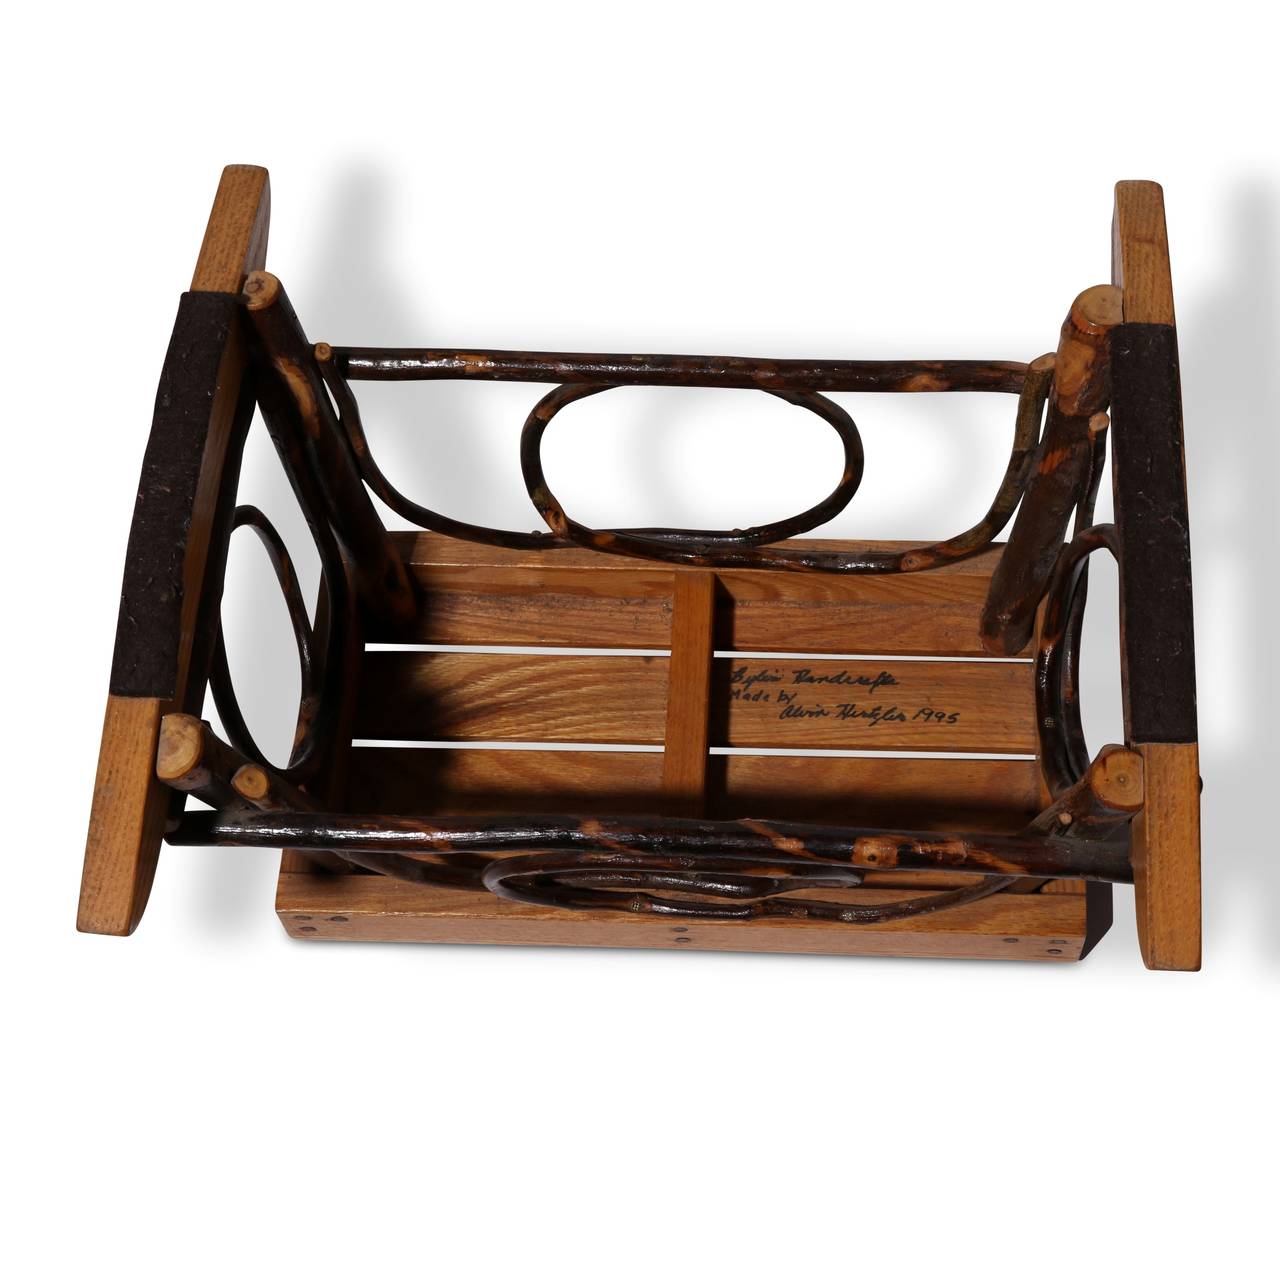 Handcrafted, signed and dated by the maker in 1995, this rocker and footstool are classic examples of excellent Amish craftsmanship. Original lacquered pine and twig construction and finish. Rugged and sturdy, perfect for afternoons on the porch or